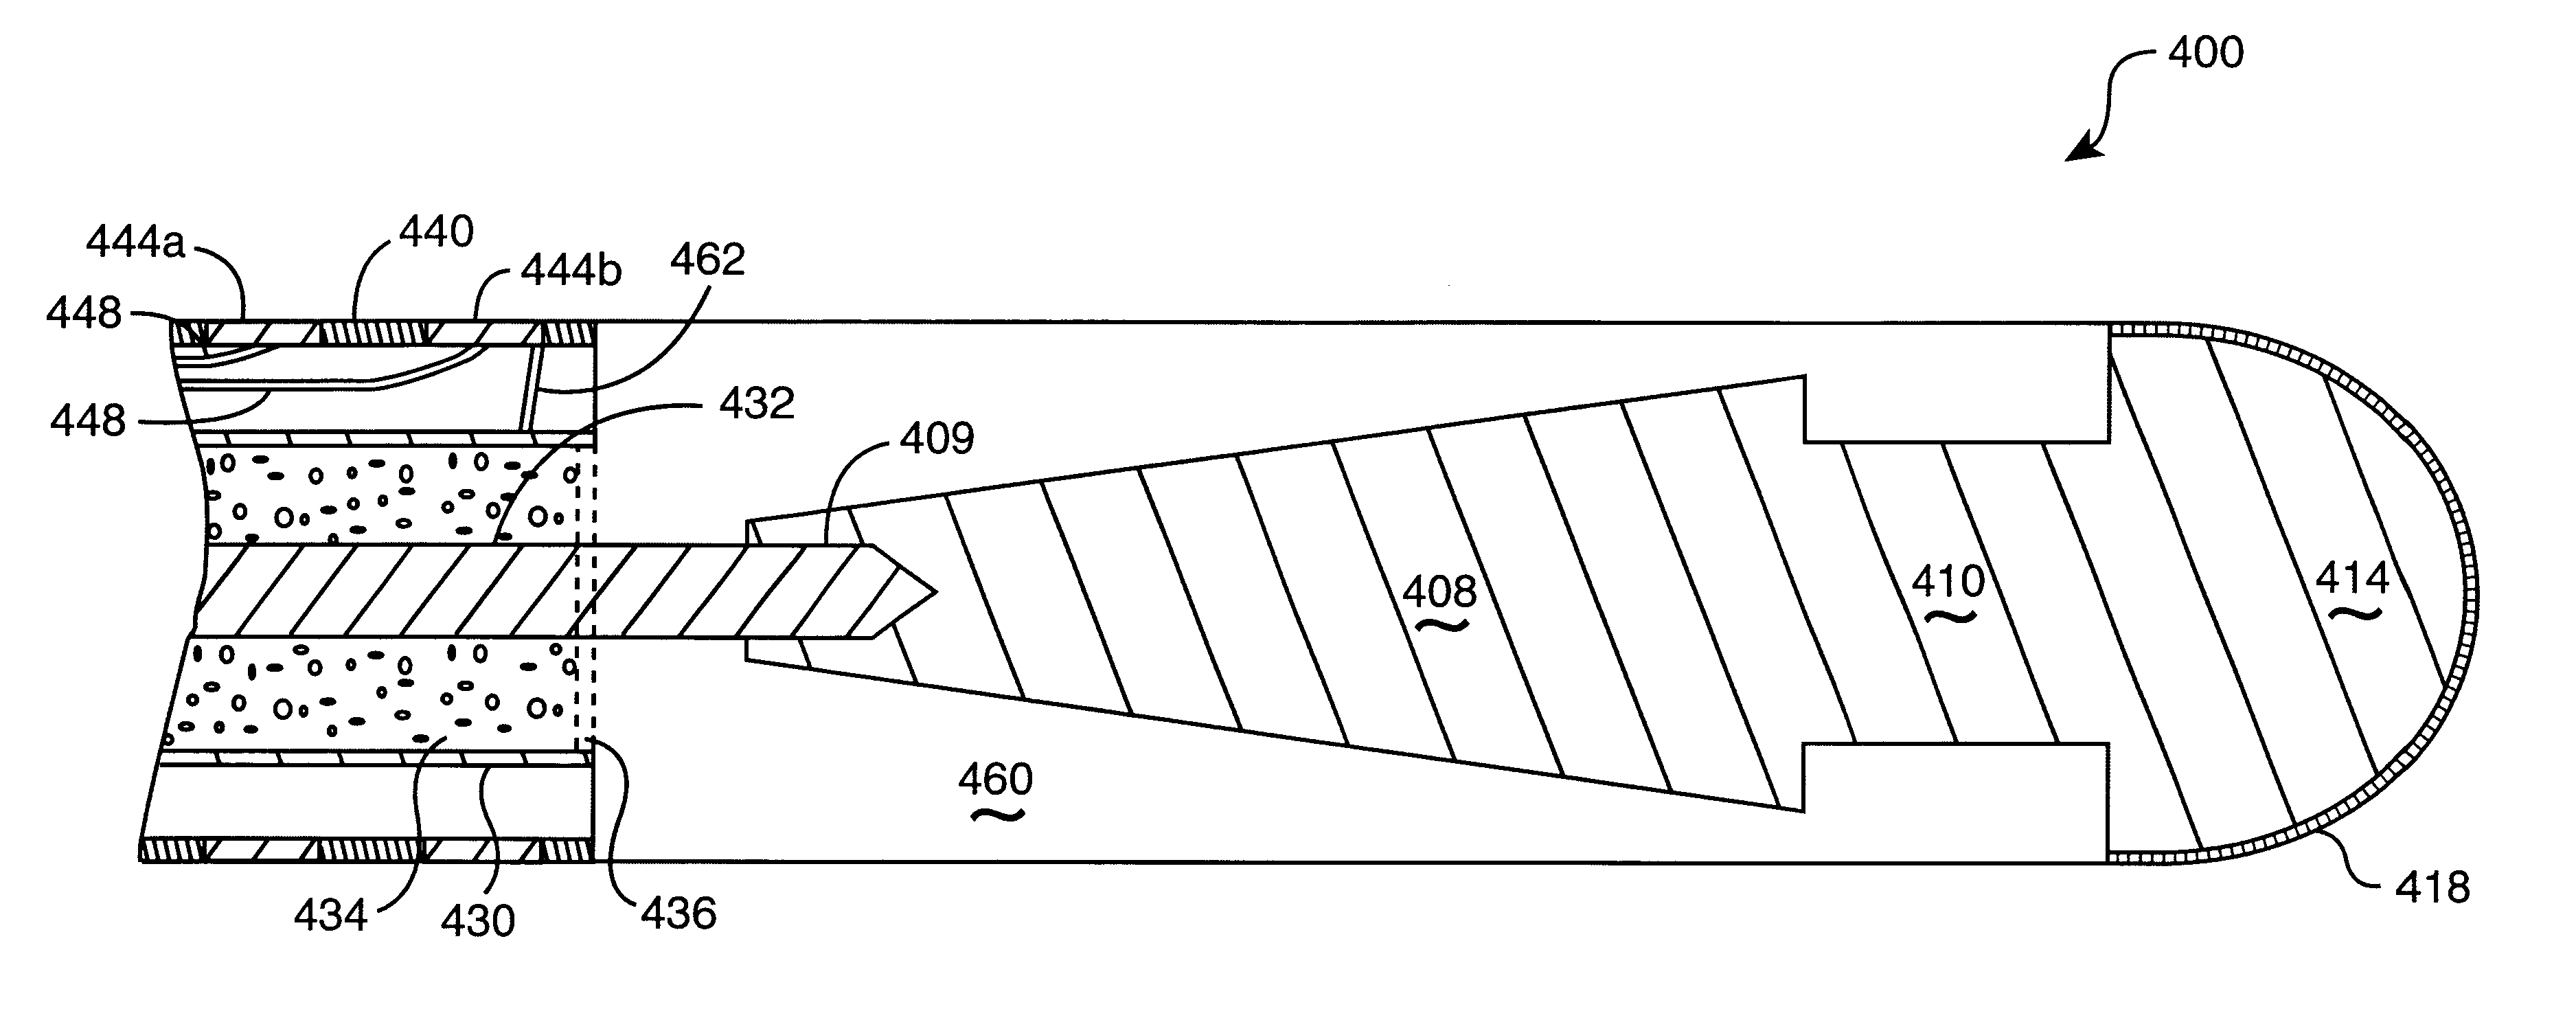 Monopole tip for ablation catheter and methods for using same